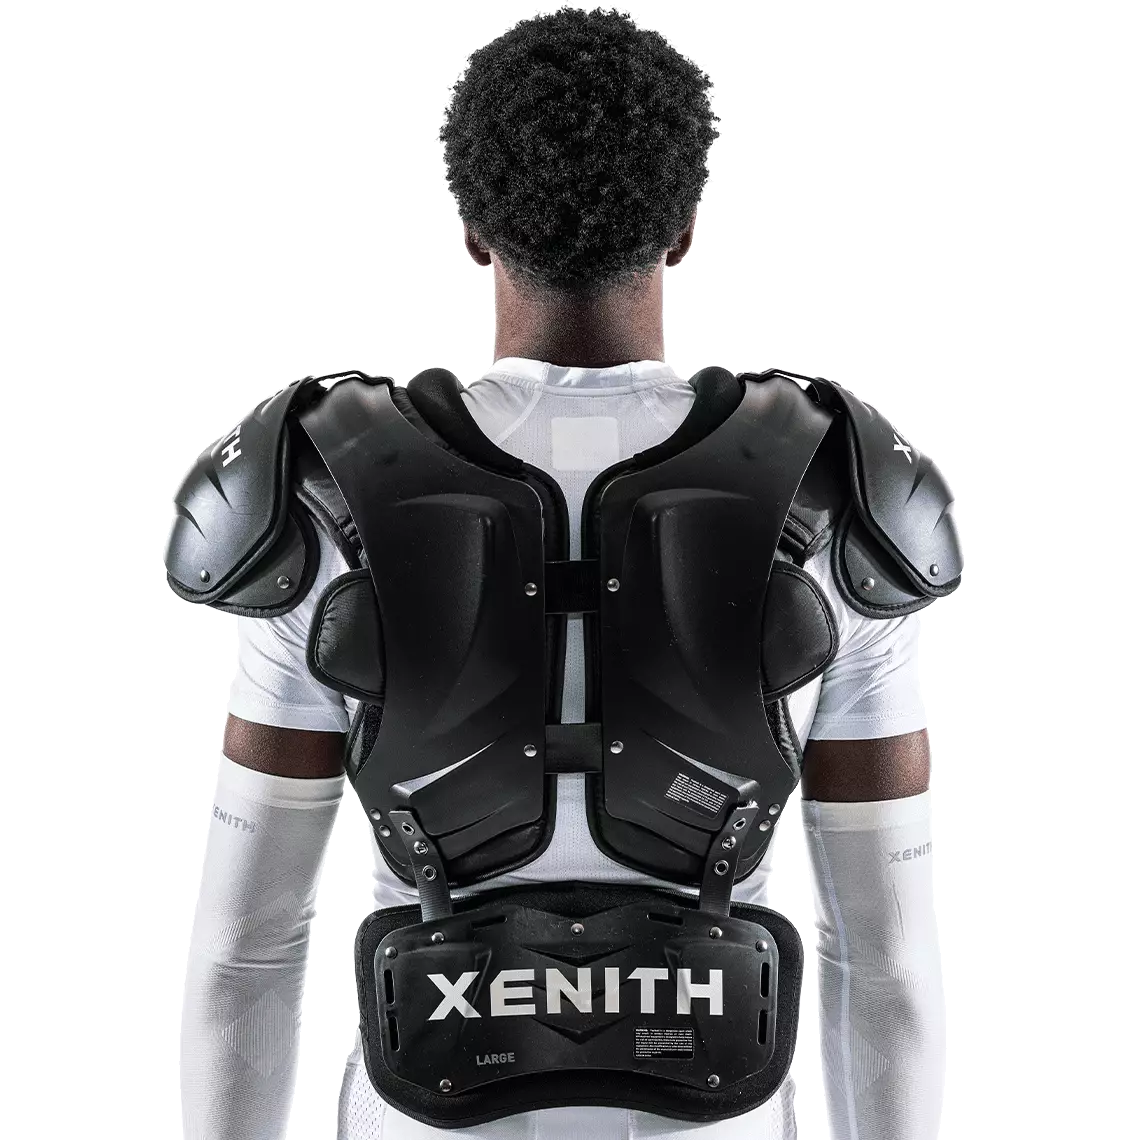 Black Xenith back plate with white Xenith logo.